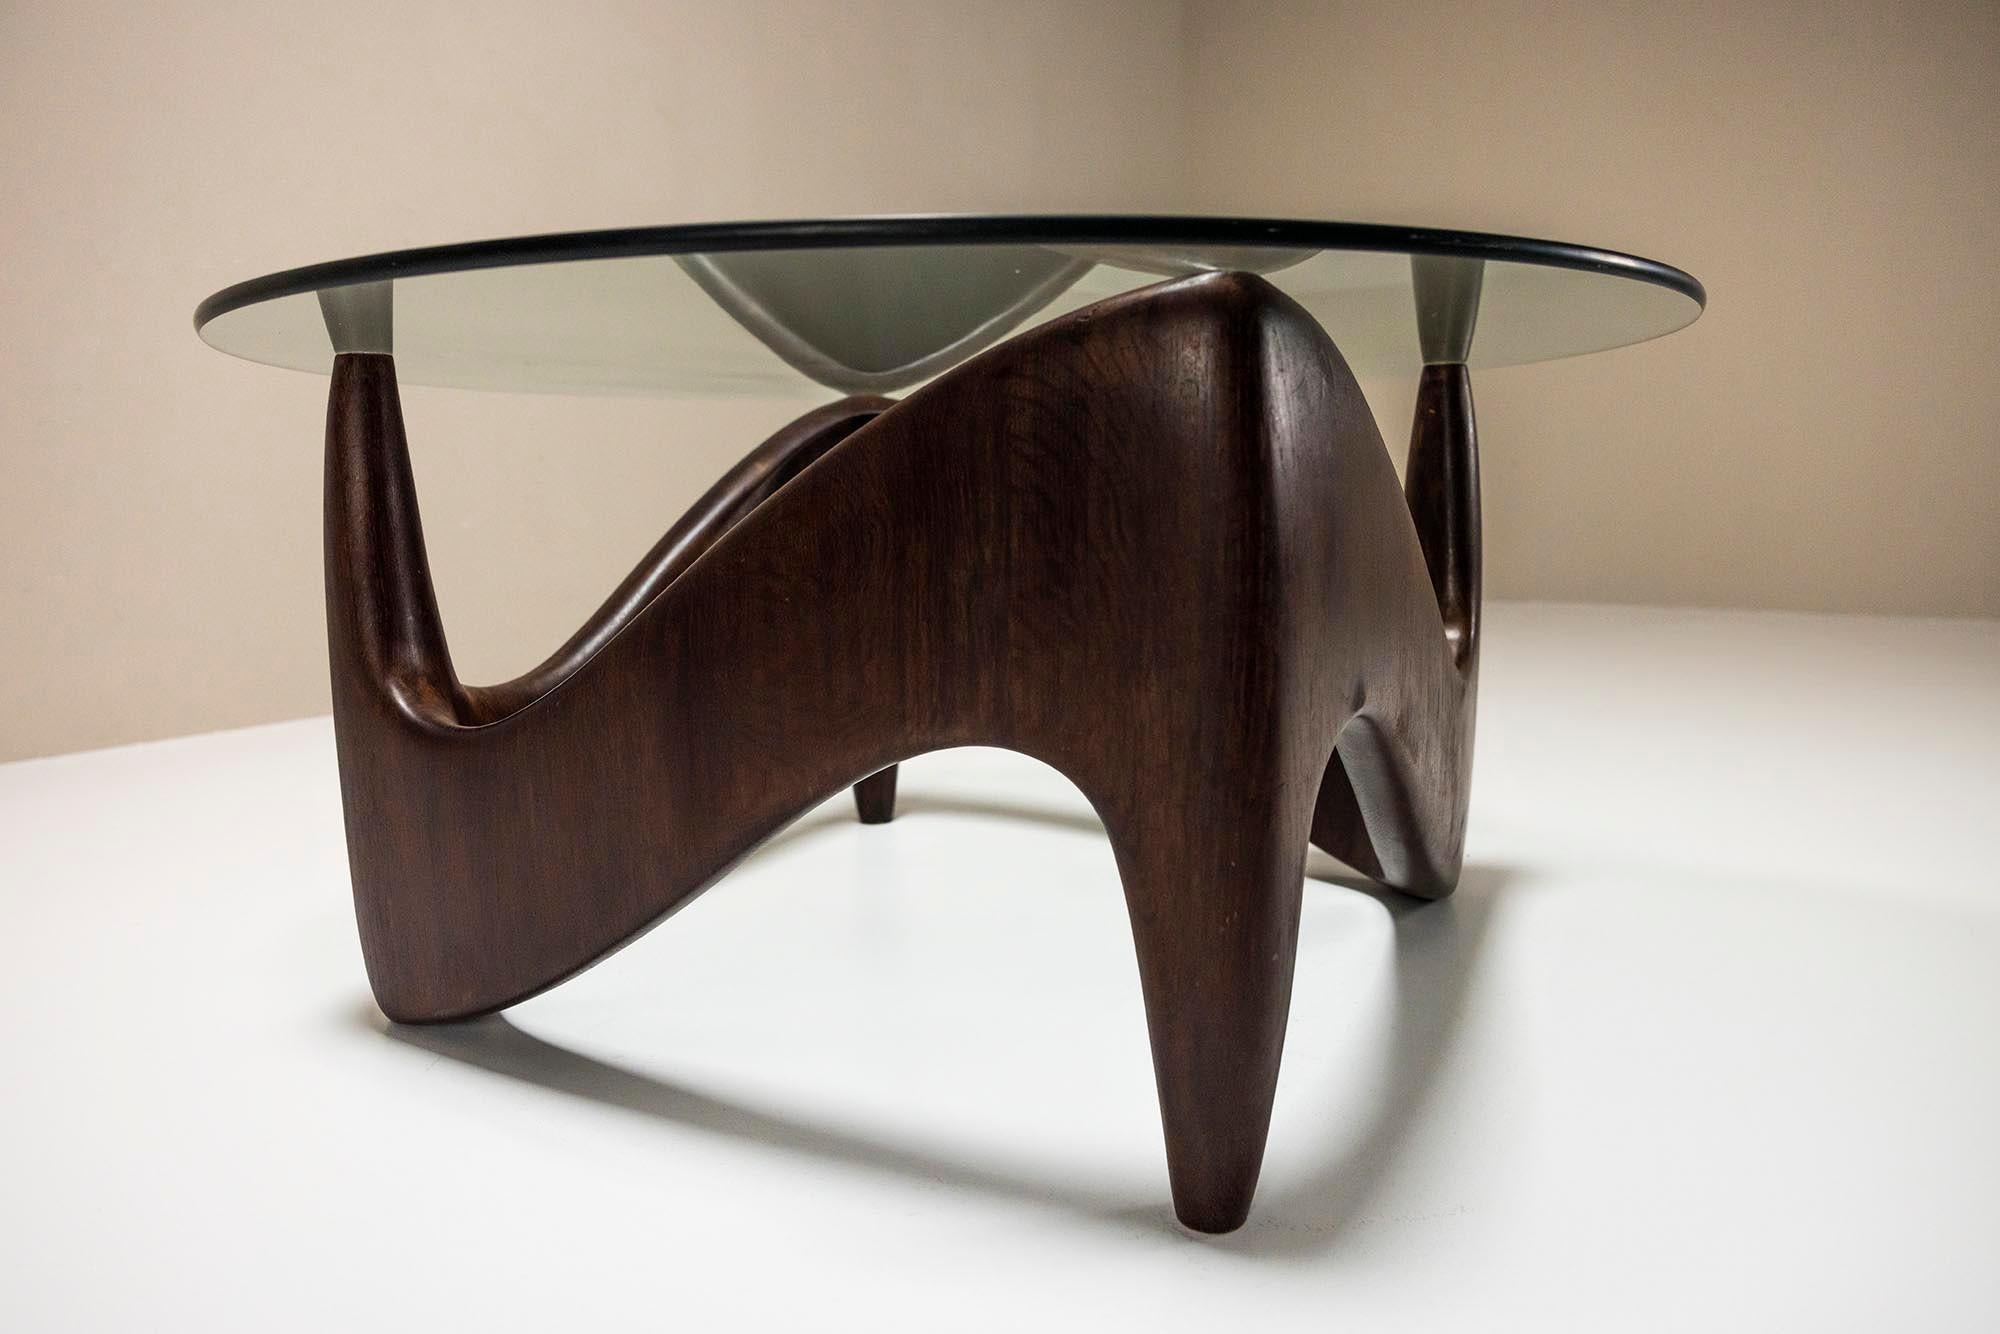 Late 20th Century Sculptural And Organic Shaped Coffee Table In Wood And Glass, Italy 1970s For Sale